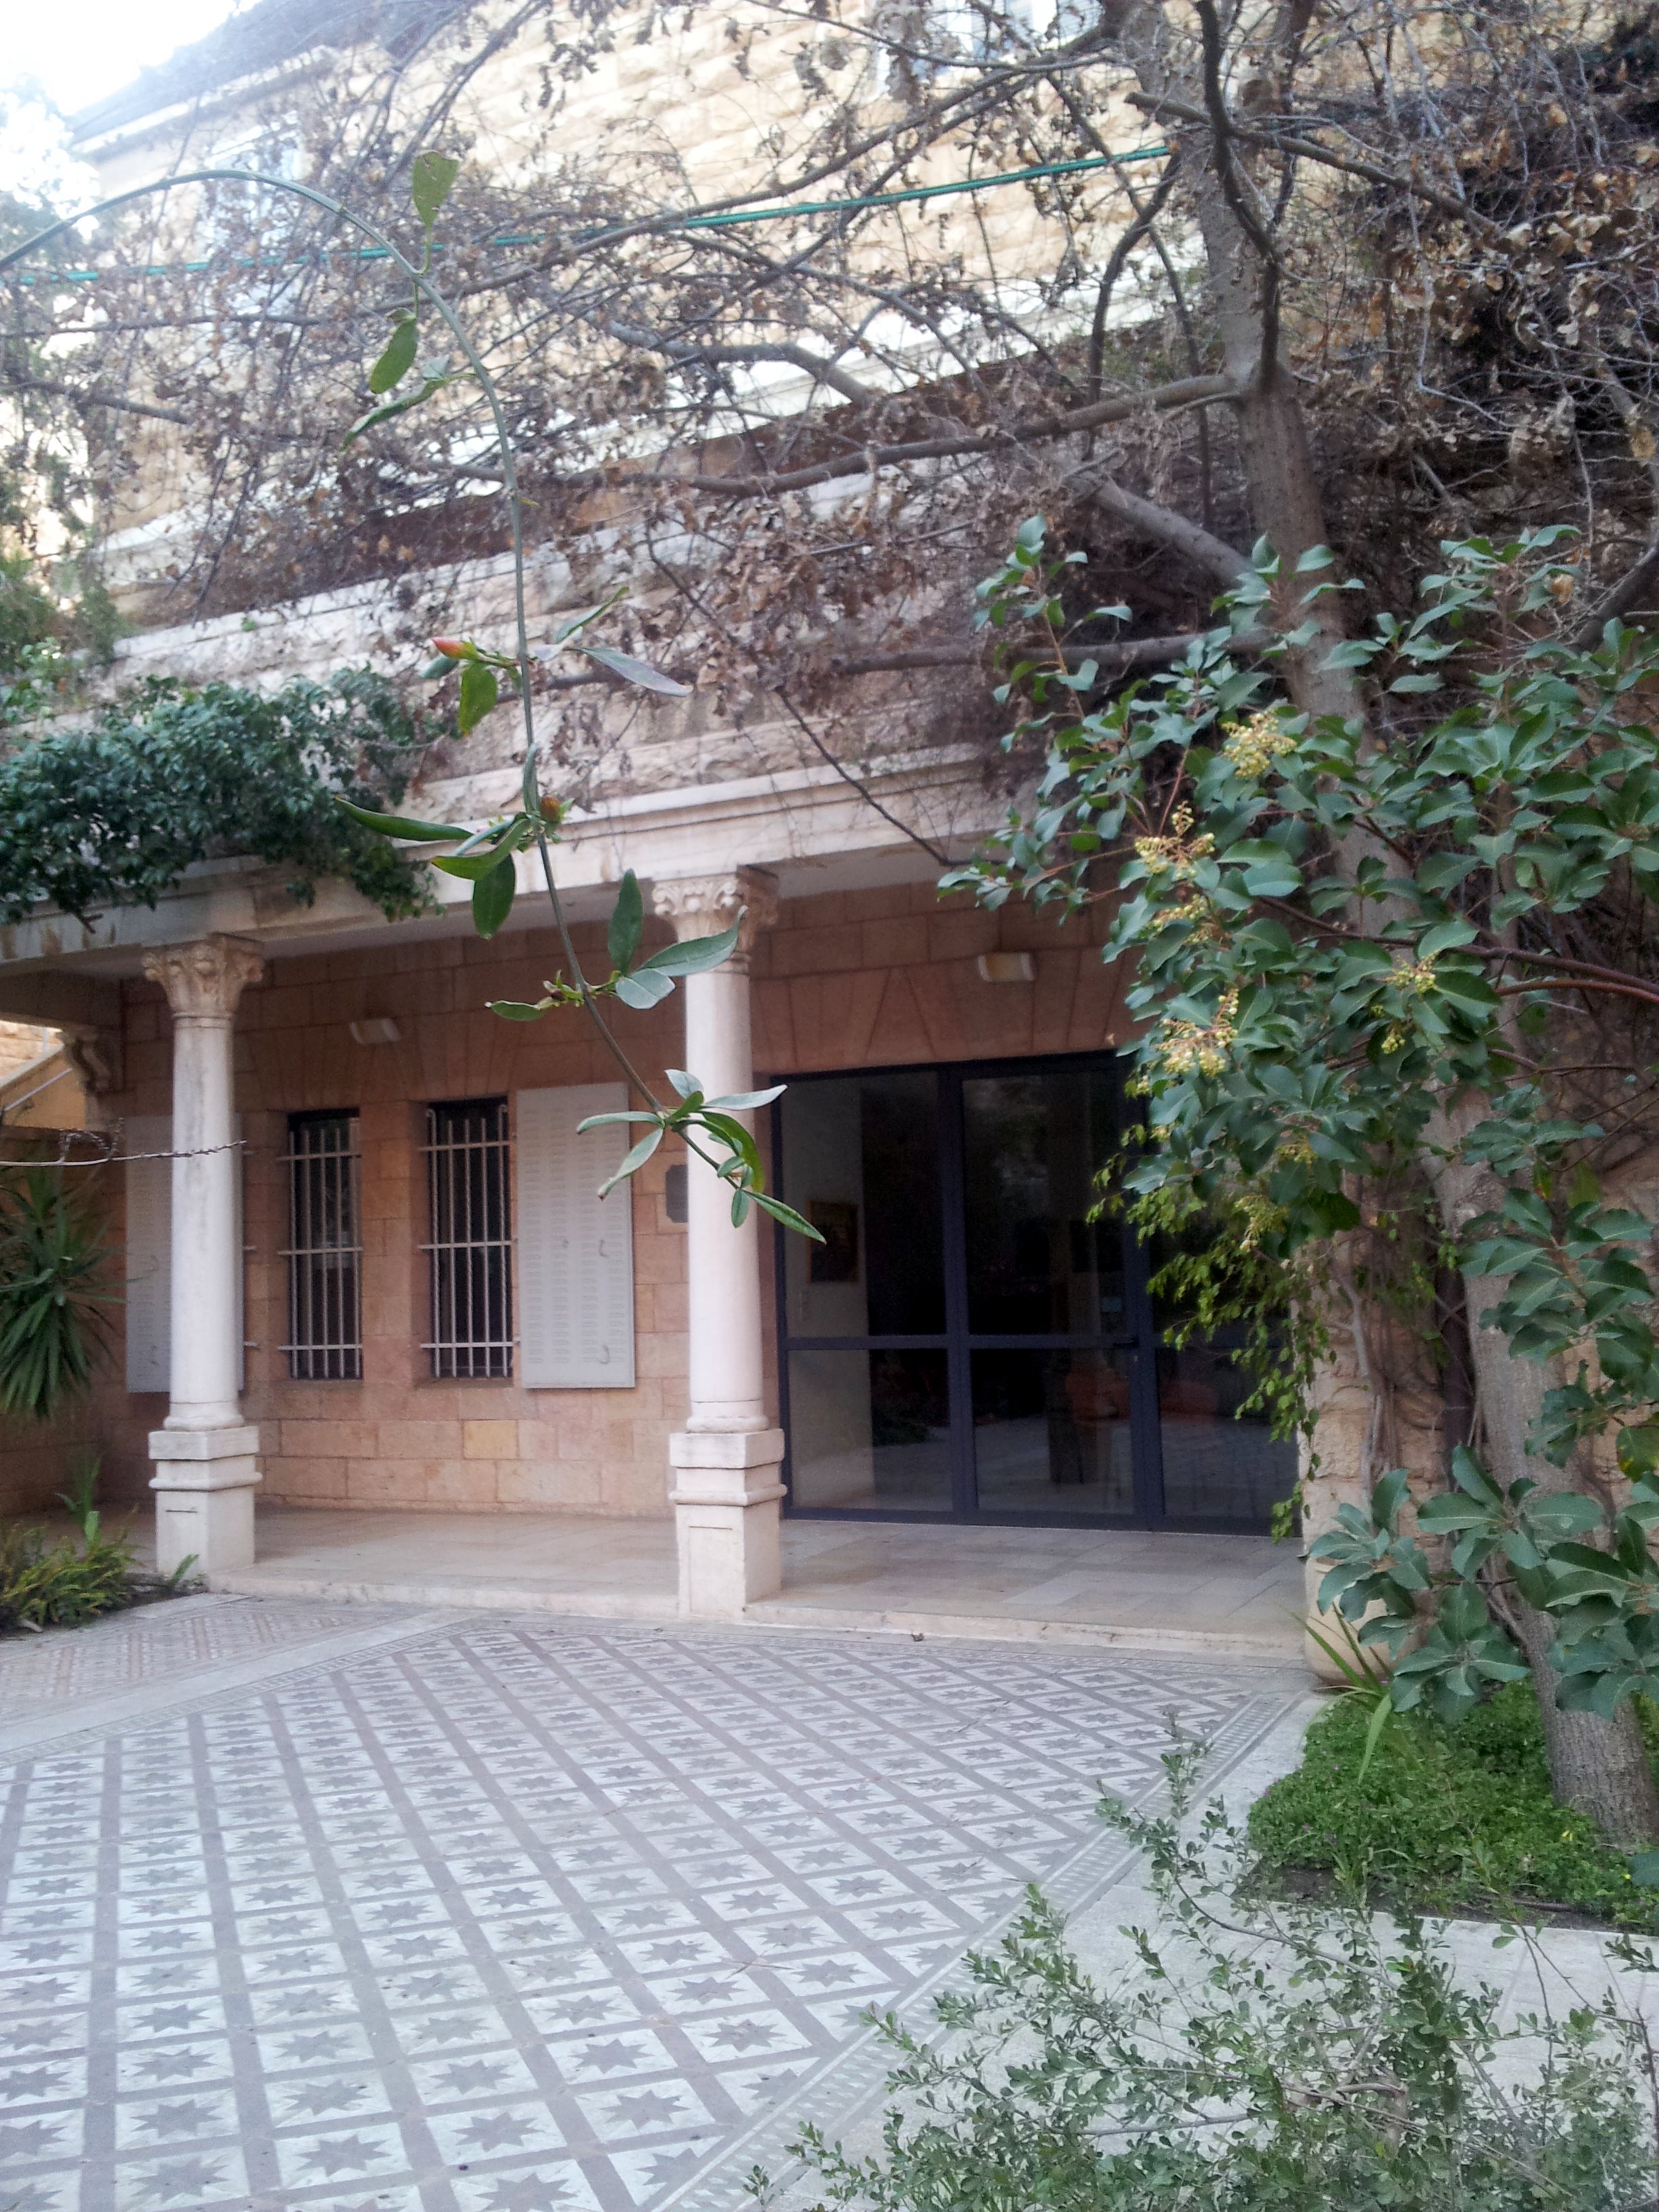 Jerusalem Institute for Policy Research